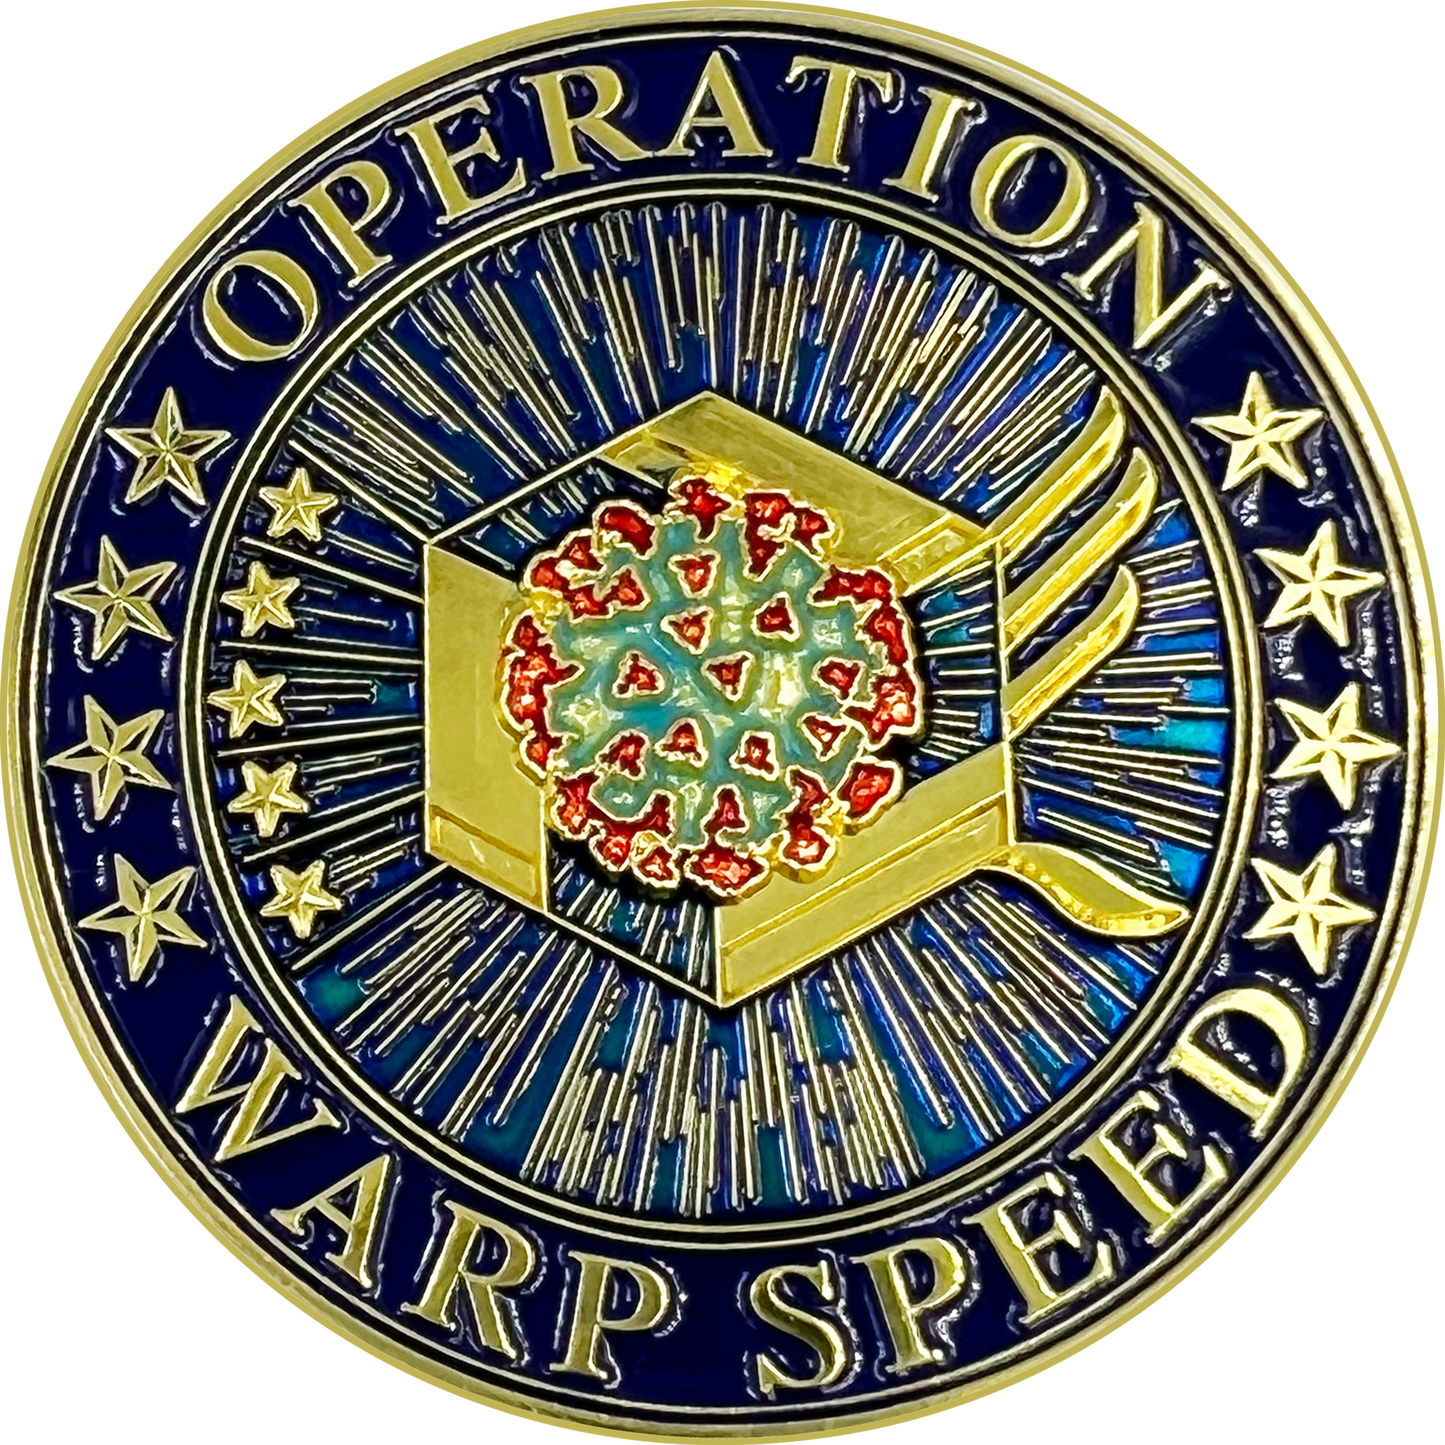 CL4-01 Operation Warp Speed Challenge Coin Baby Formula Shortage Task Force Department of Agriculture HHS CDC